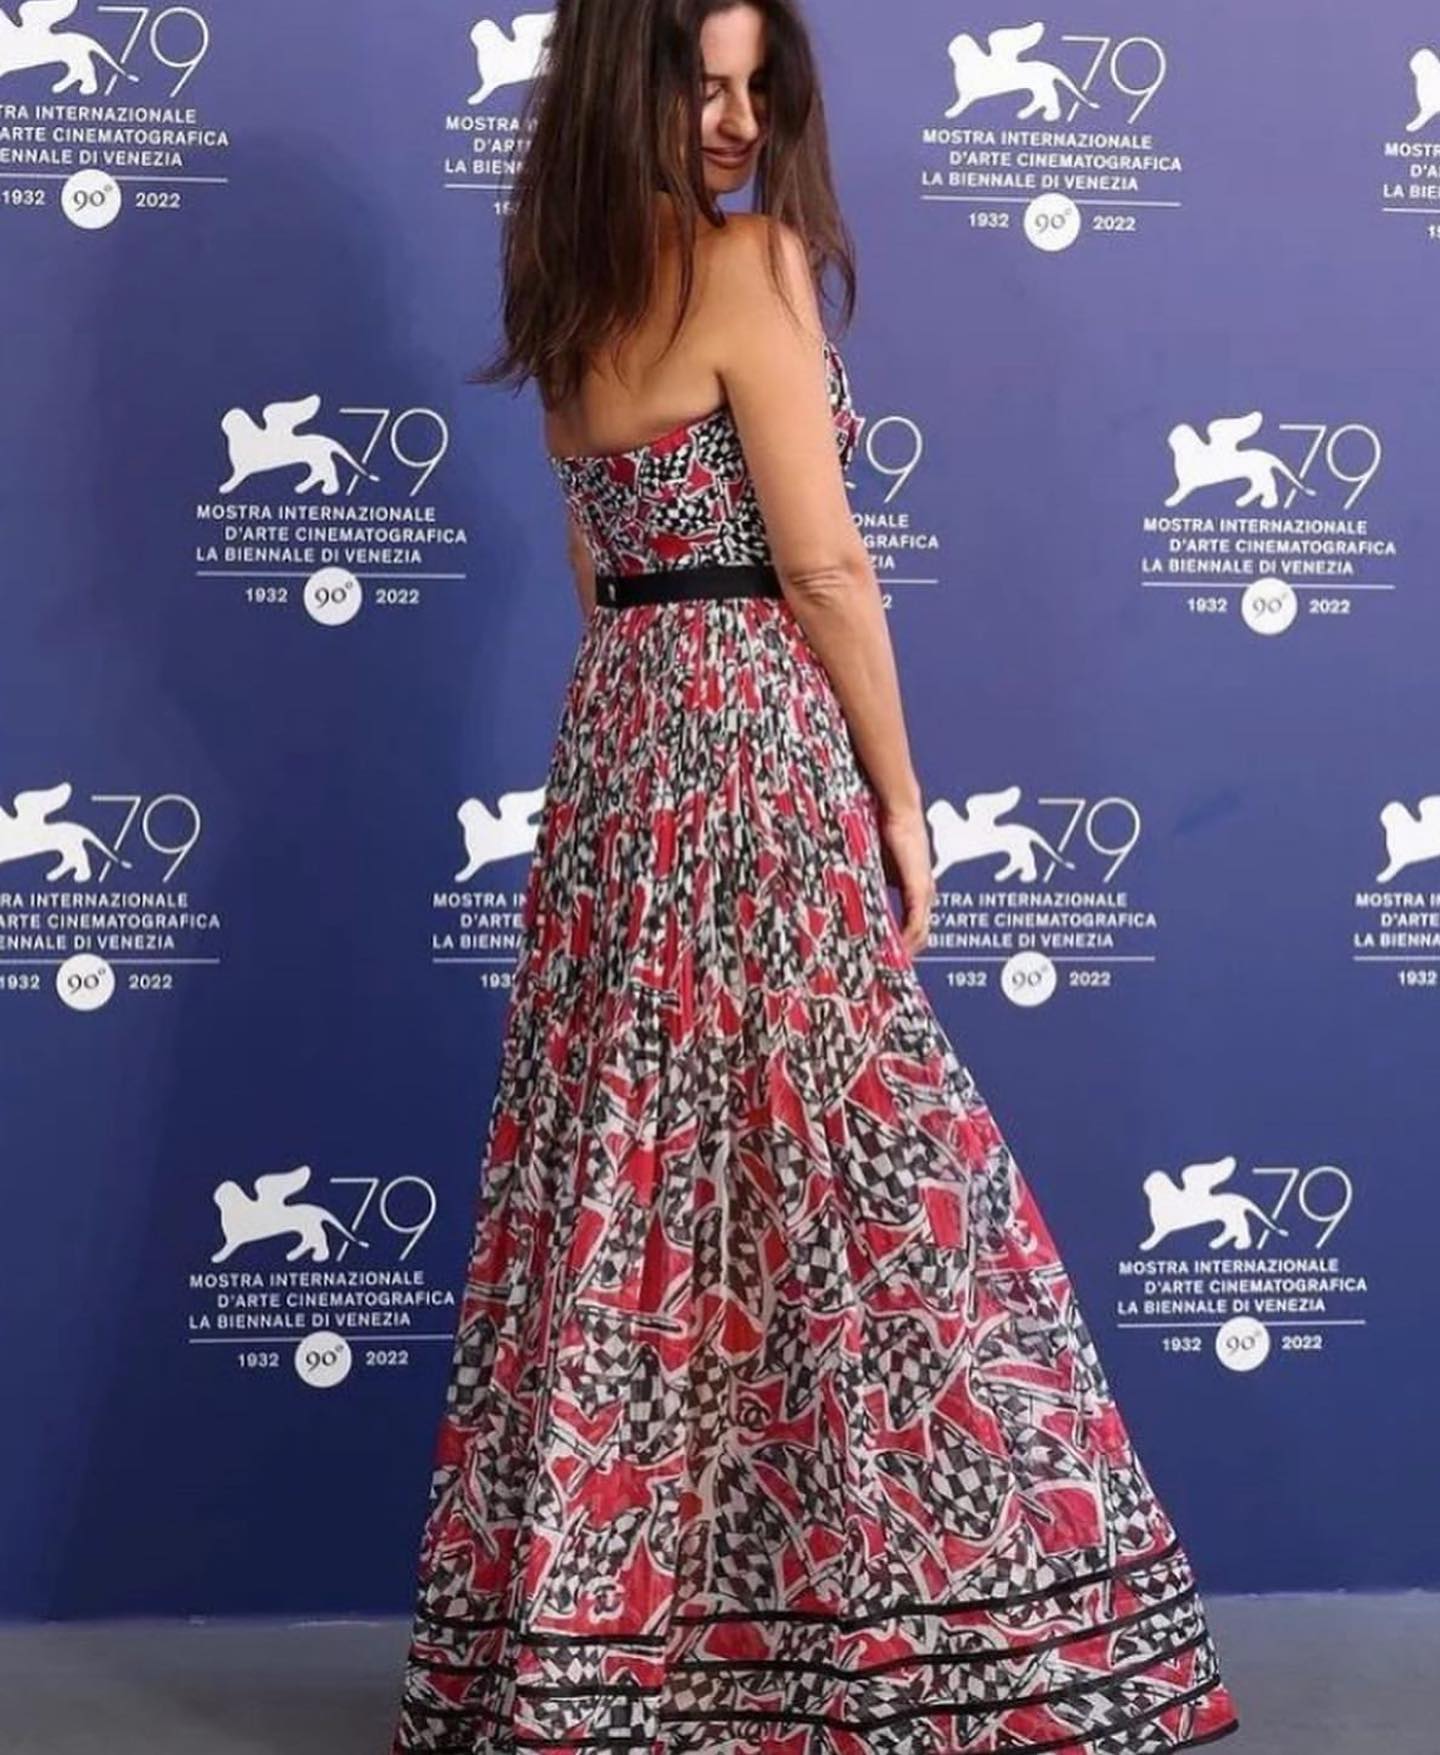 Penelope Cruz Stuns In Chanel As Wears A Printed Gown For The